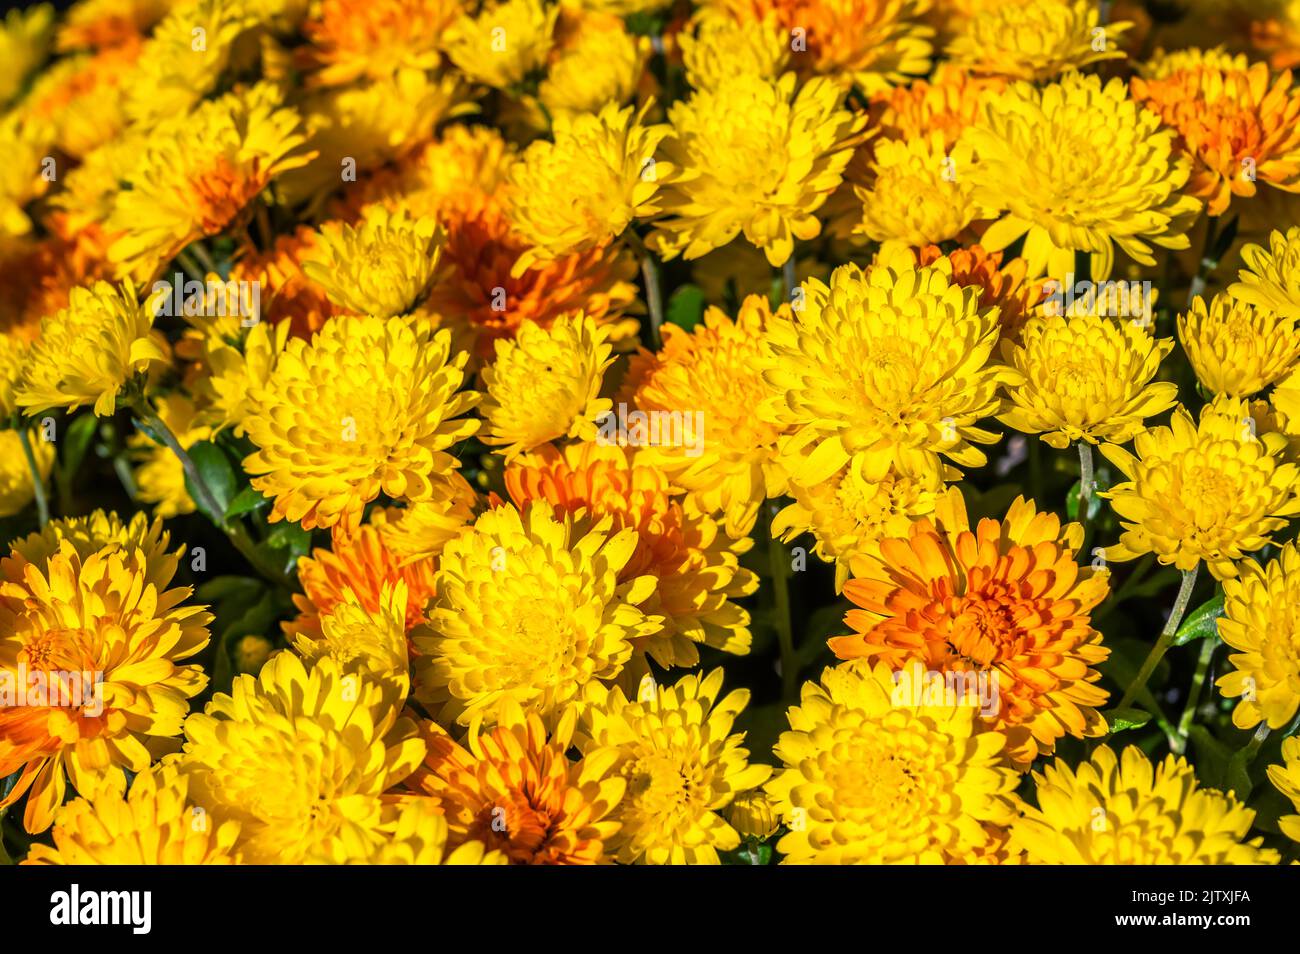 Orange winter asters as a floral background Stock Photo